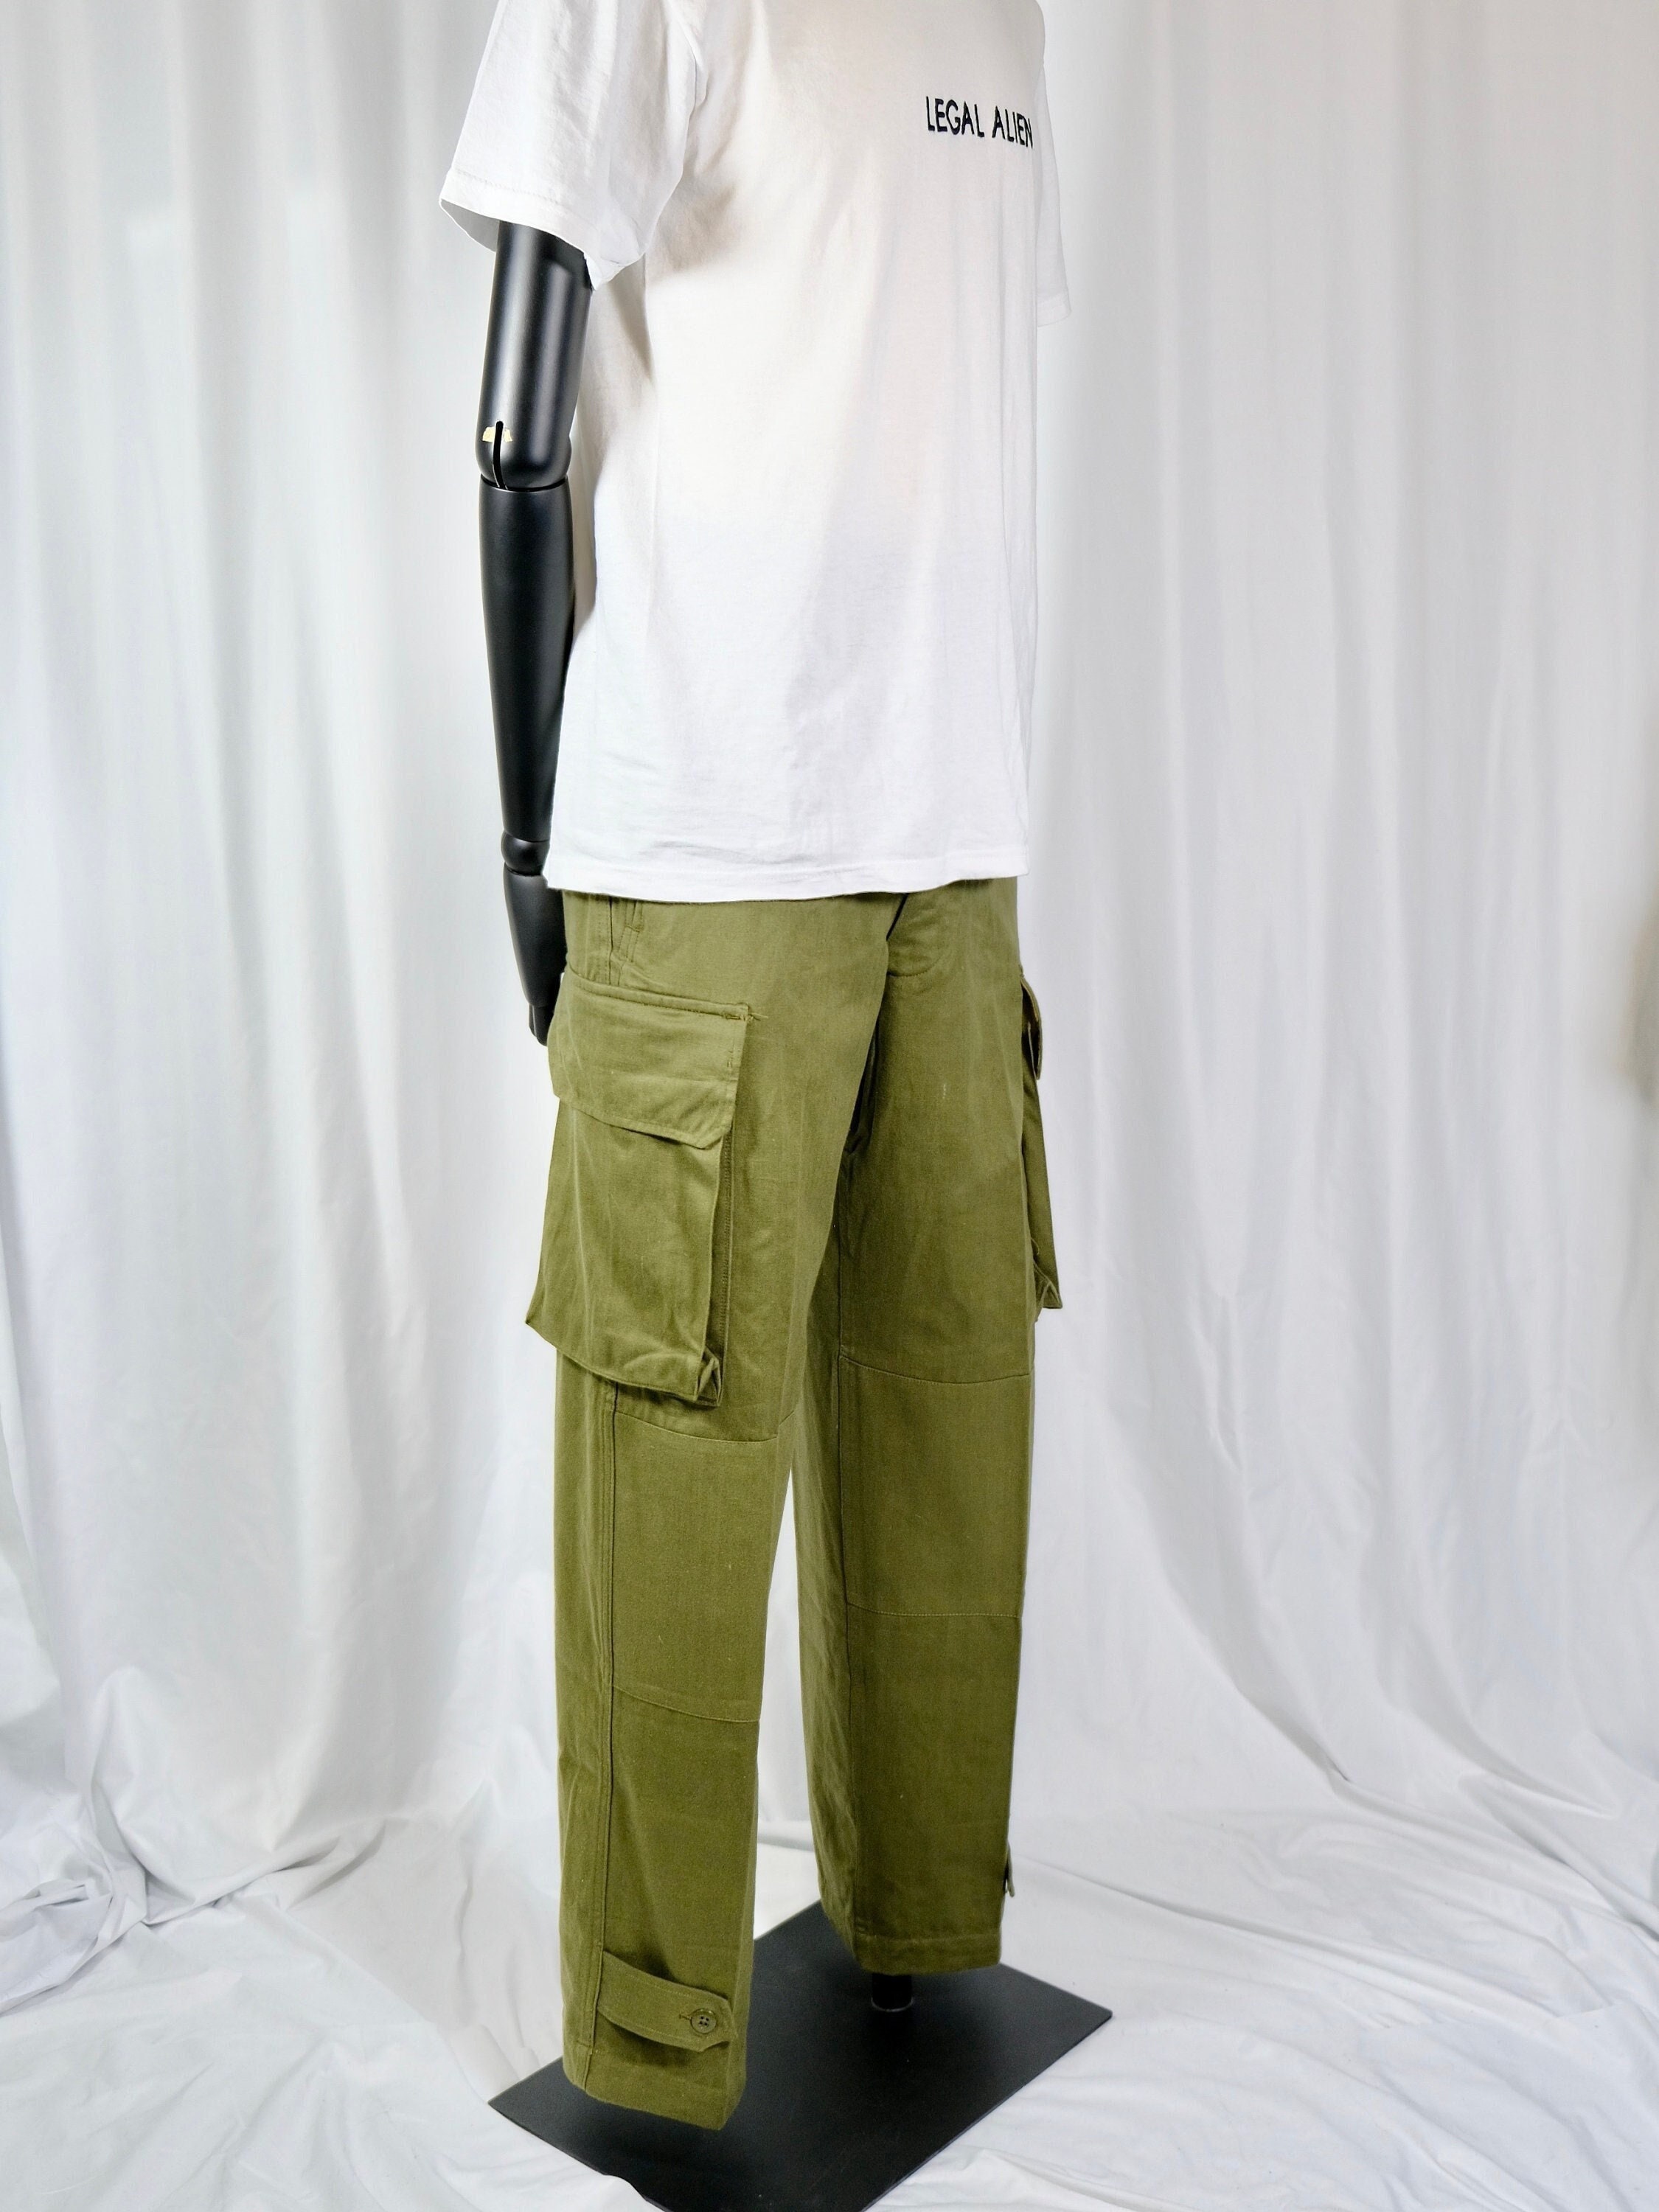 DEADSTOCK MILITAIRE M47 Pant : Non Wash Pants of the French - Etsy